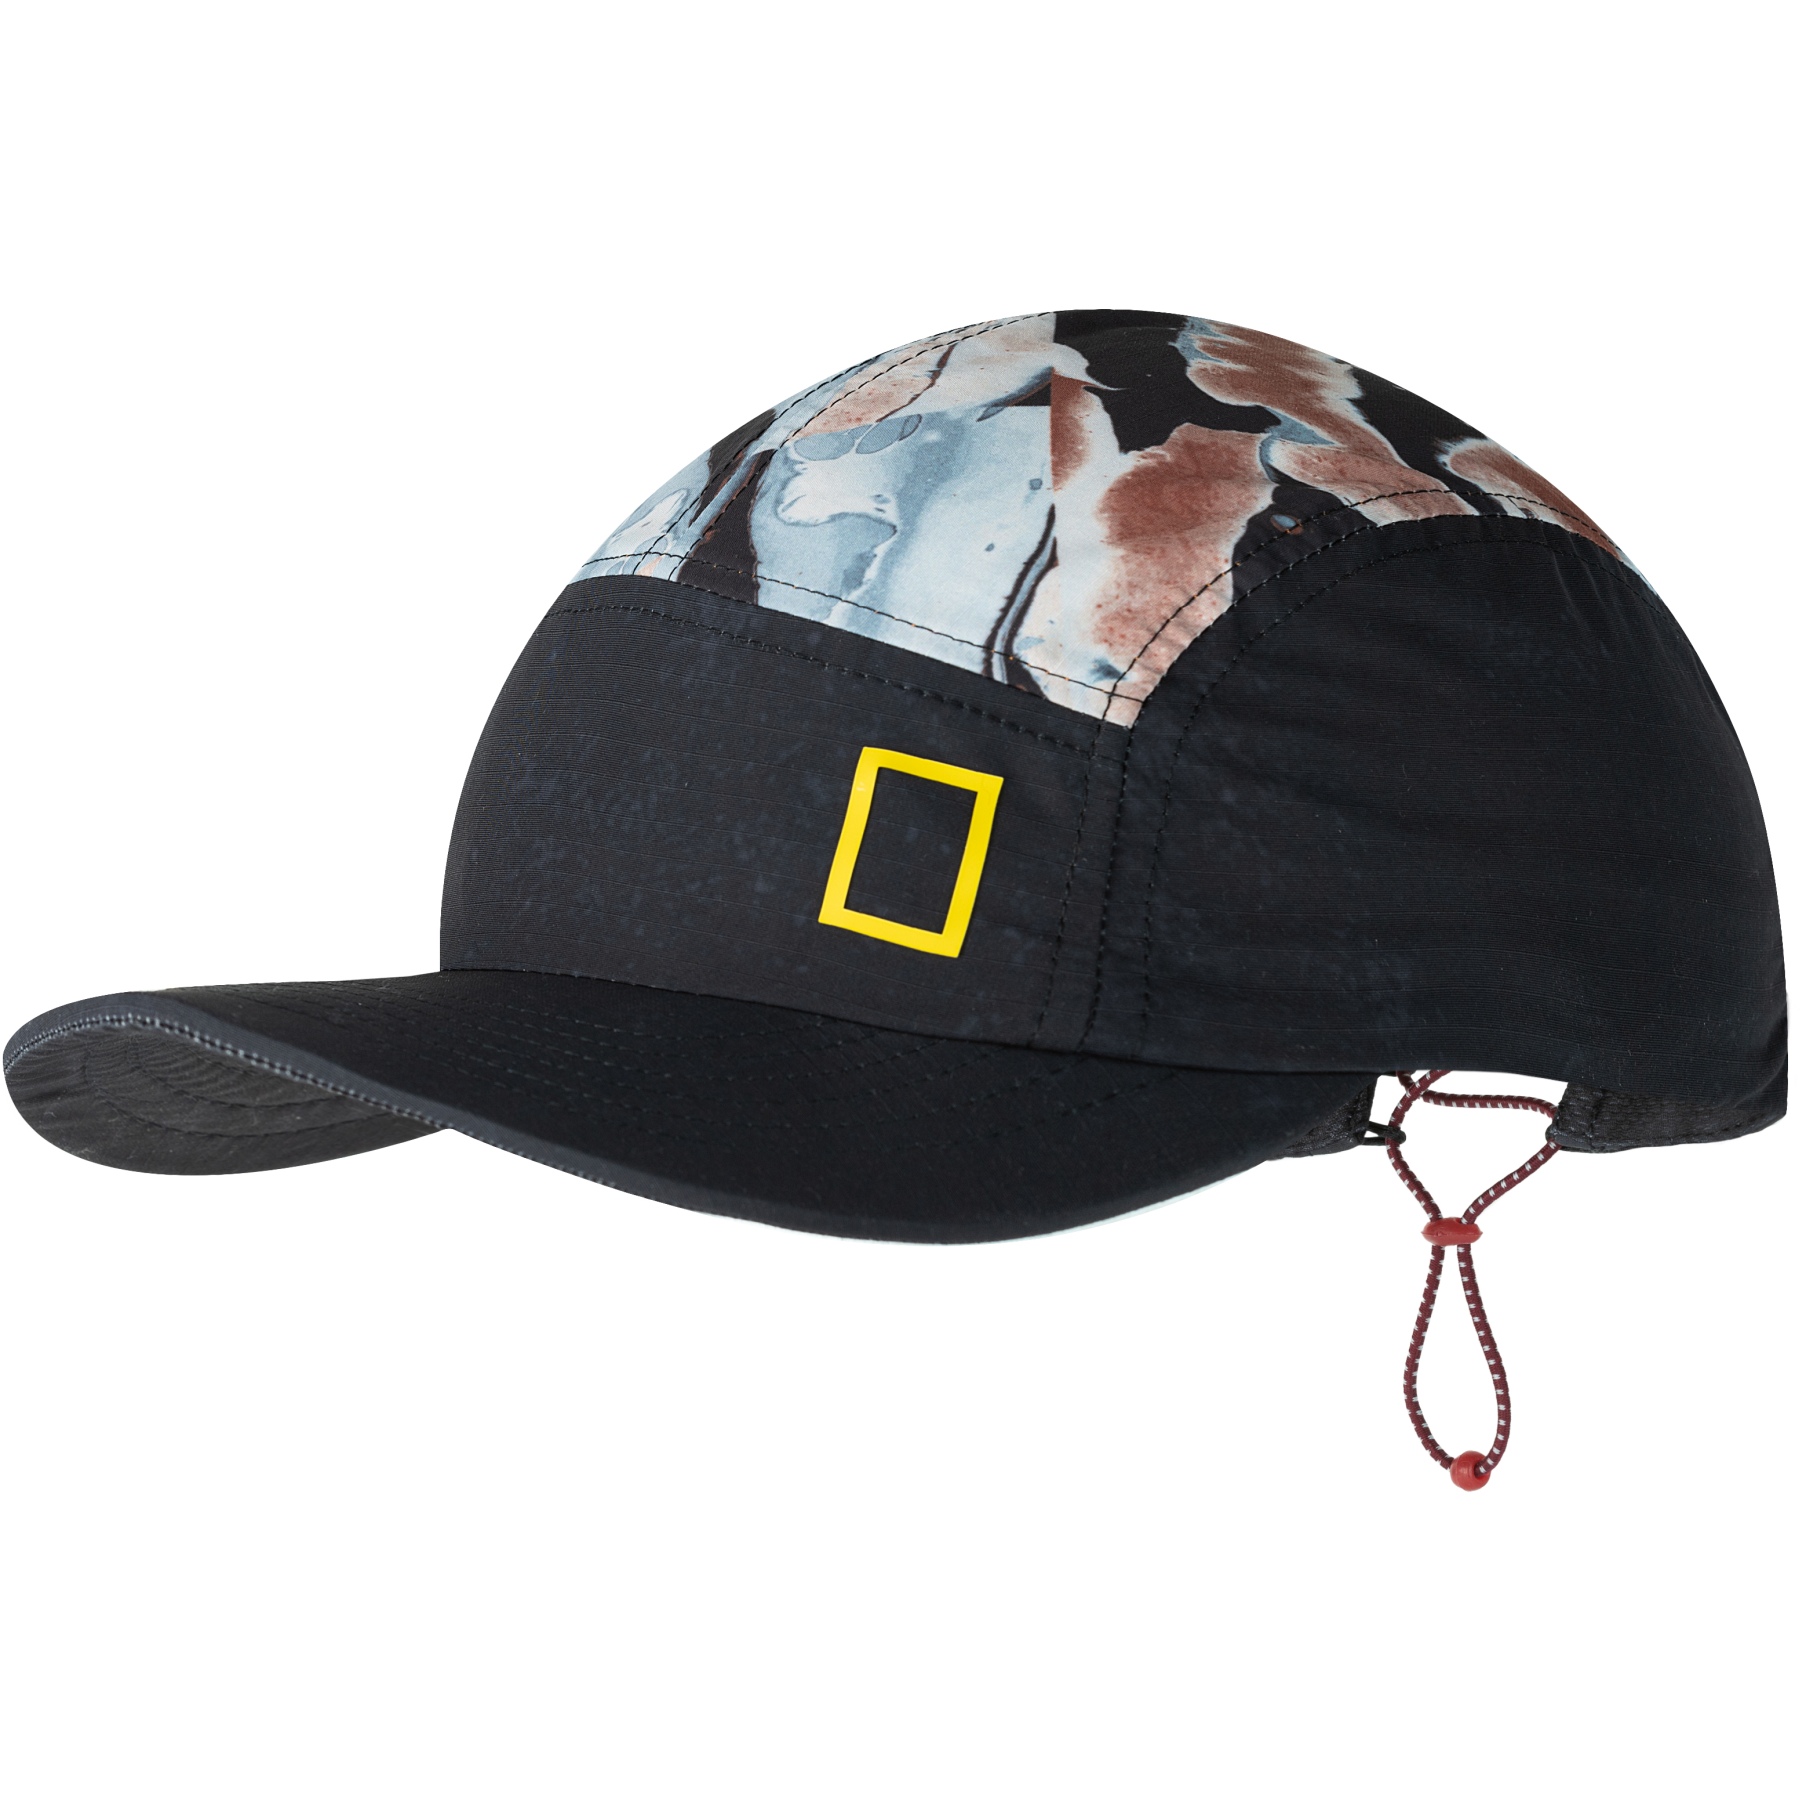 Picture of Buff® (National Geographic) 5 Panel Explore Cap - Reige Black